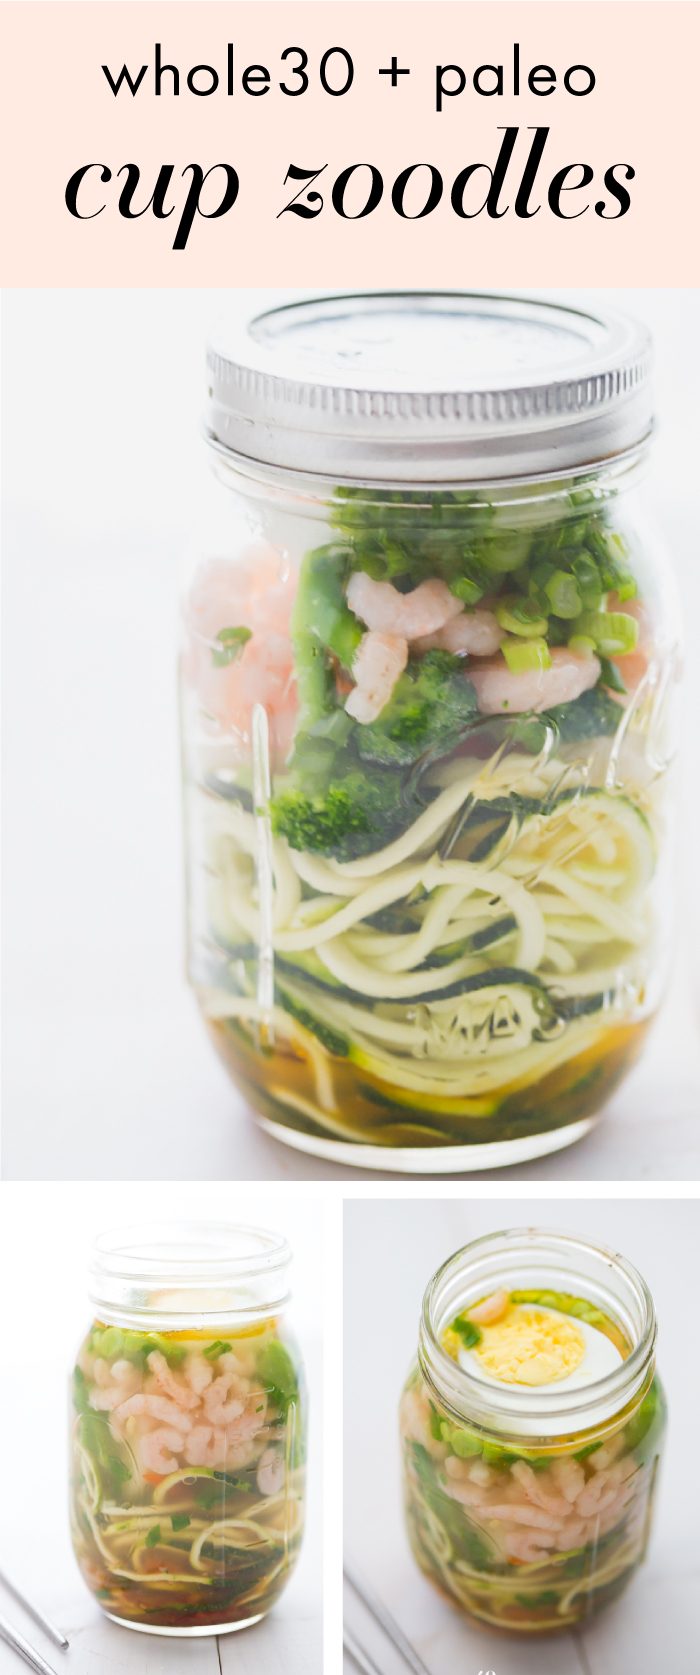 Whole30 cup zoodles - Whole30 mason jar lunch